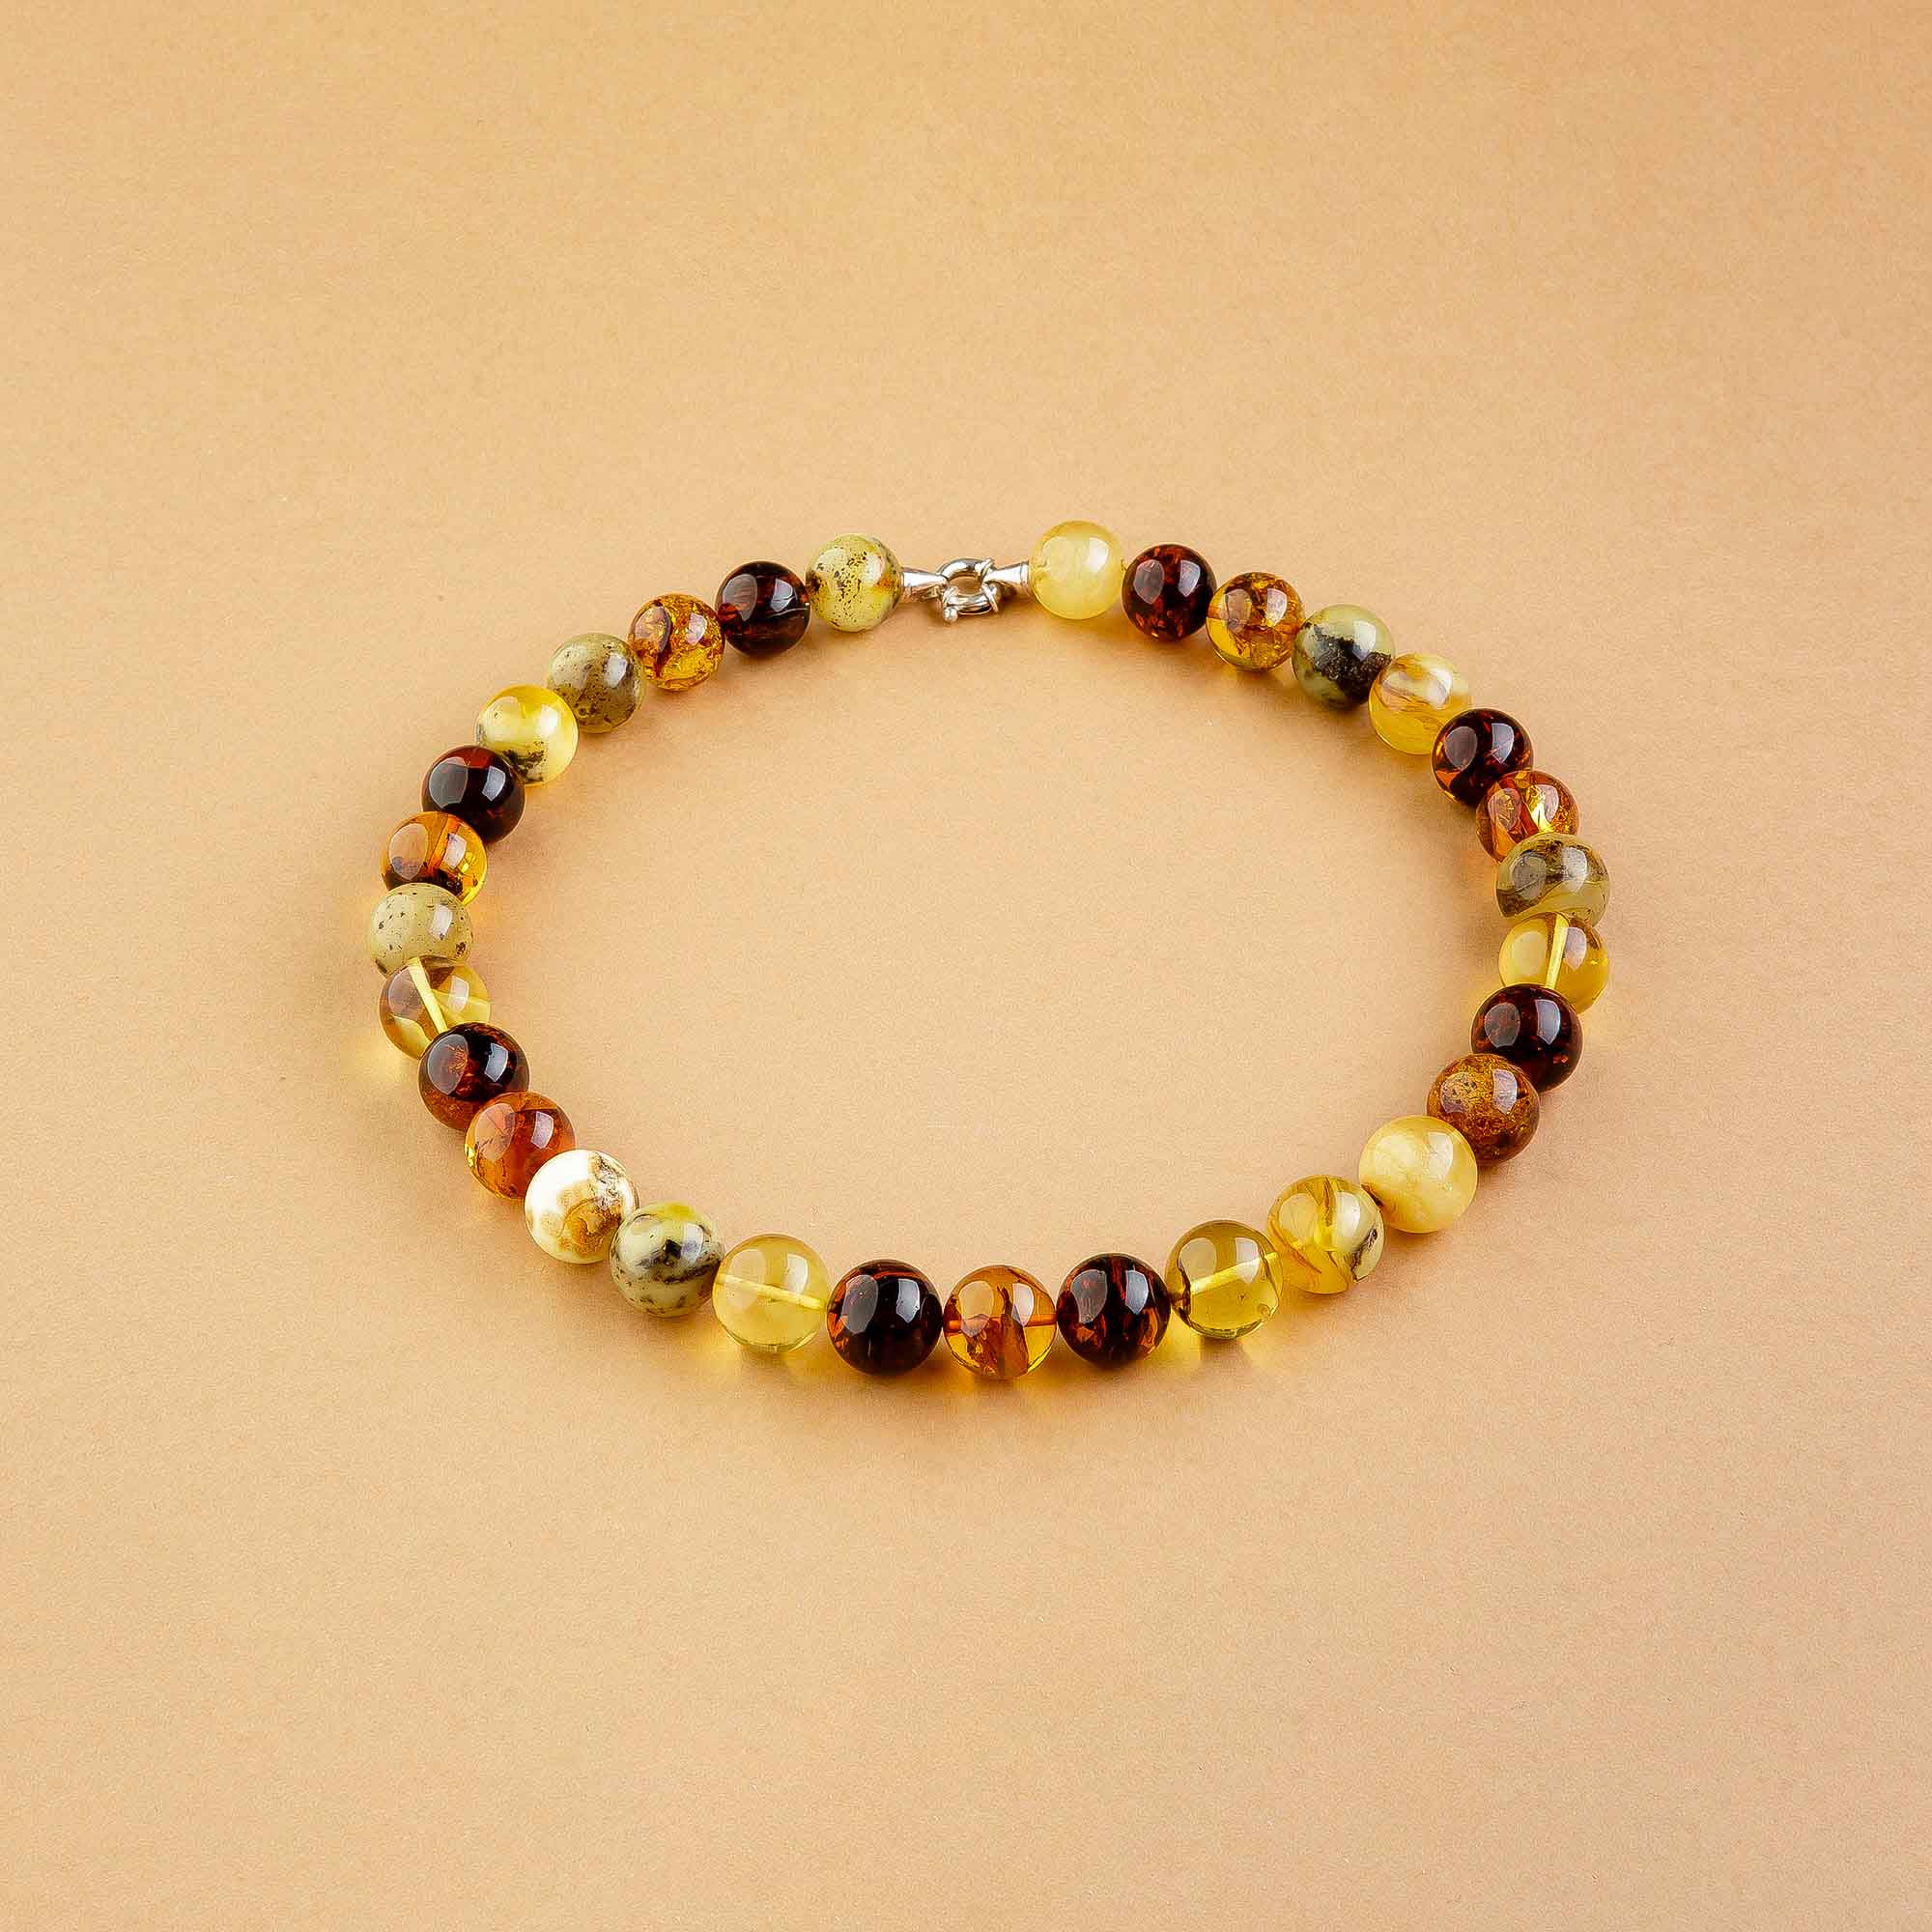 Bracelets of Natural Baltic Amber for Wrist and Angle